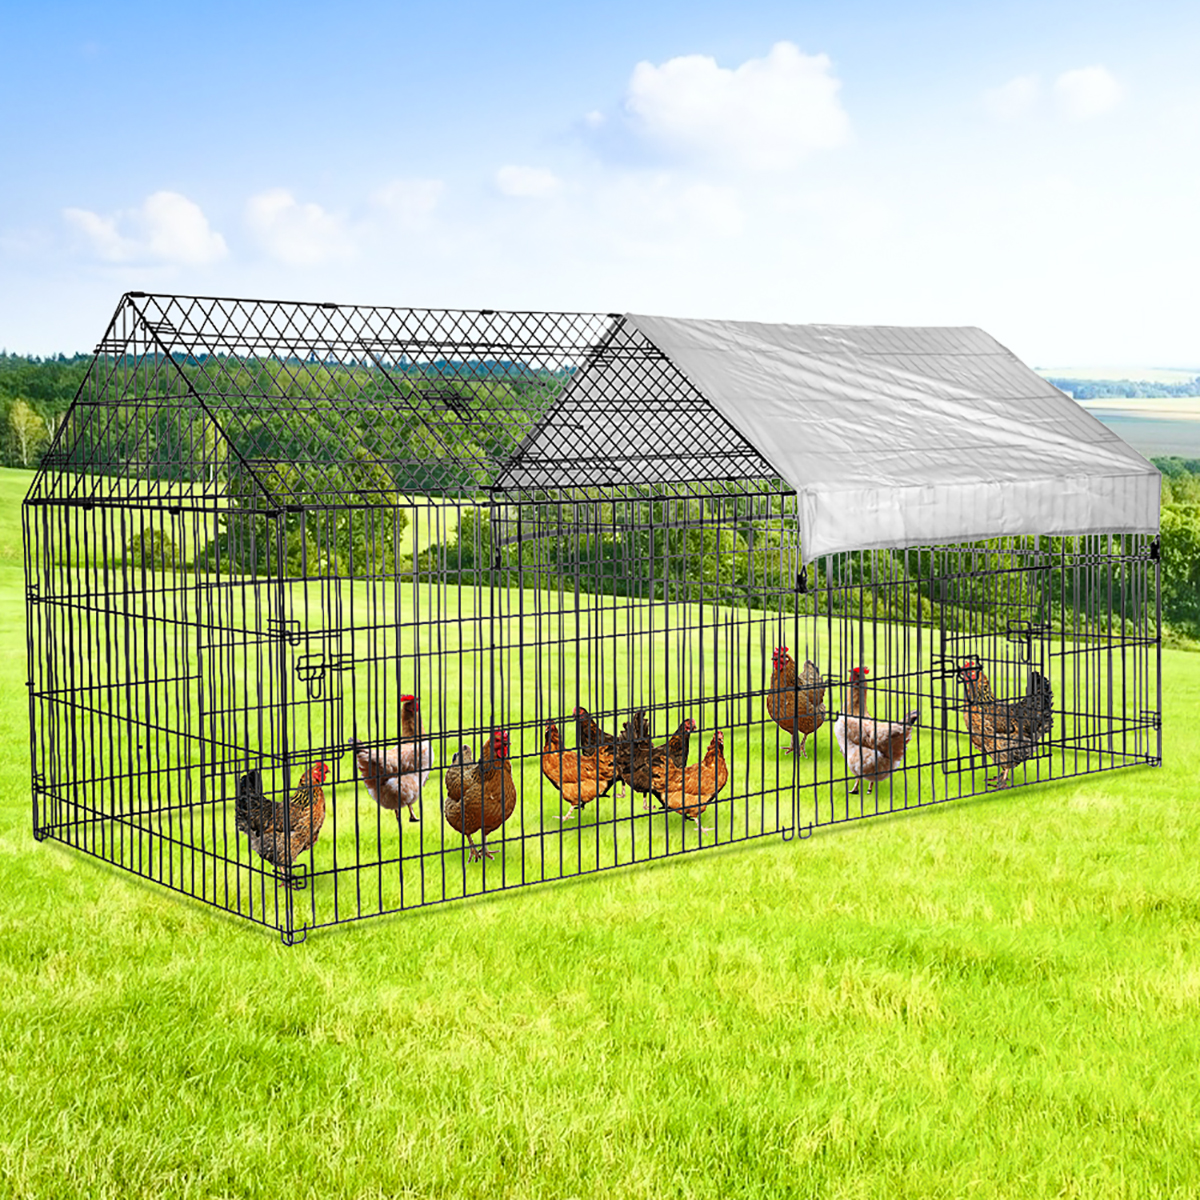 PawGiant 86''x40''Chicken Coop Large Metal Chicken Cage House Waterproof - image 1 of 11